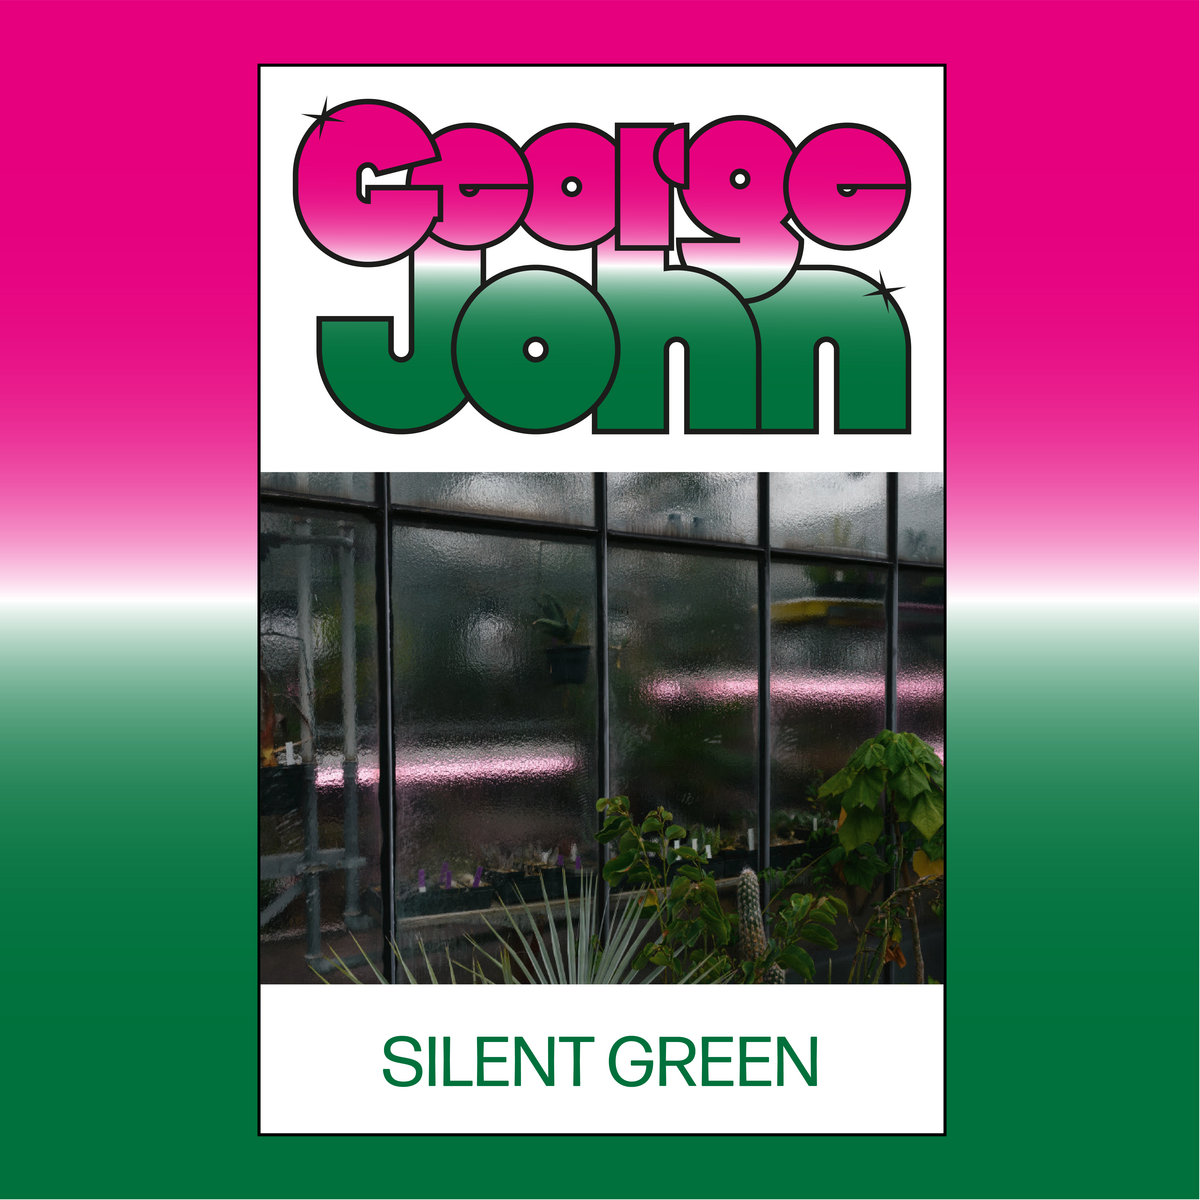 Get familiar with George John and his modern funk & jazz infused EP "Silent Green"